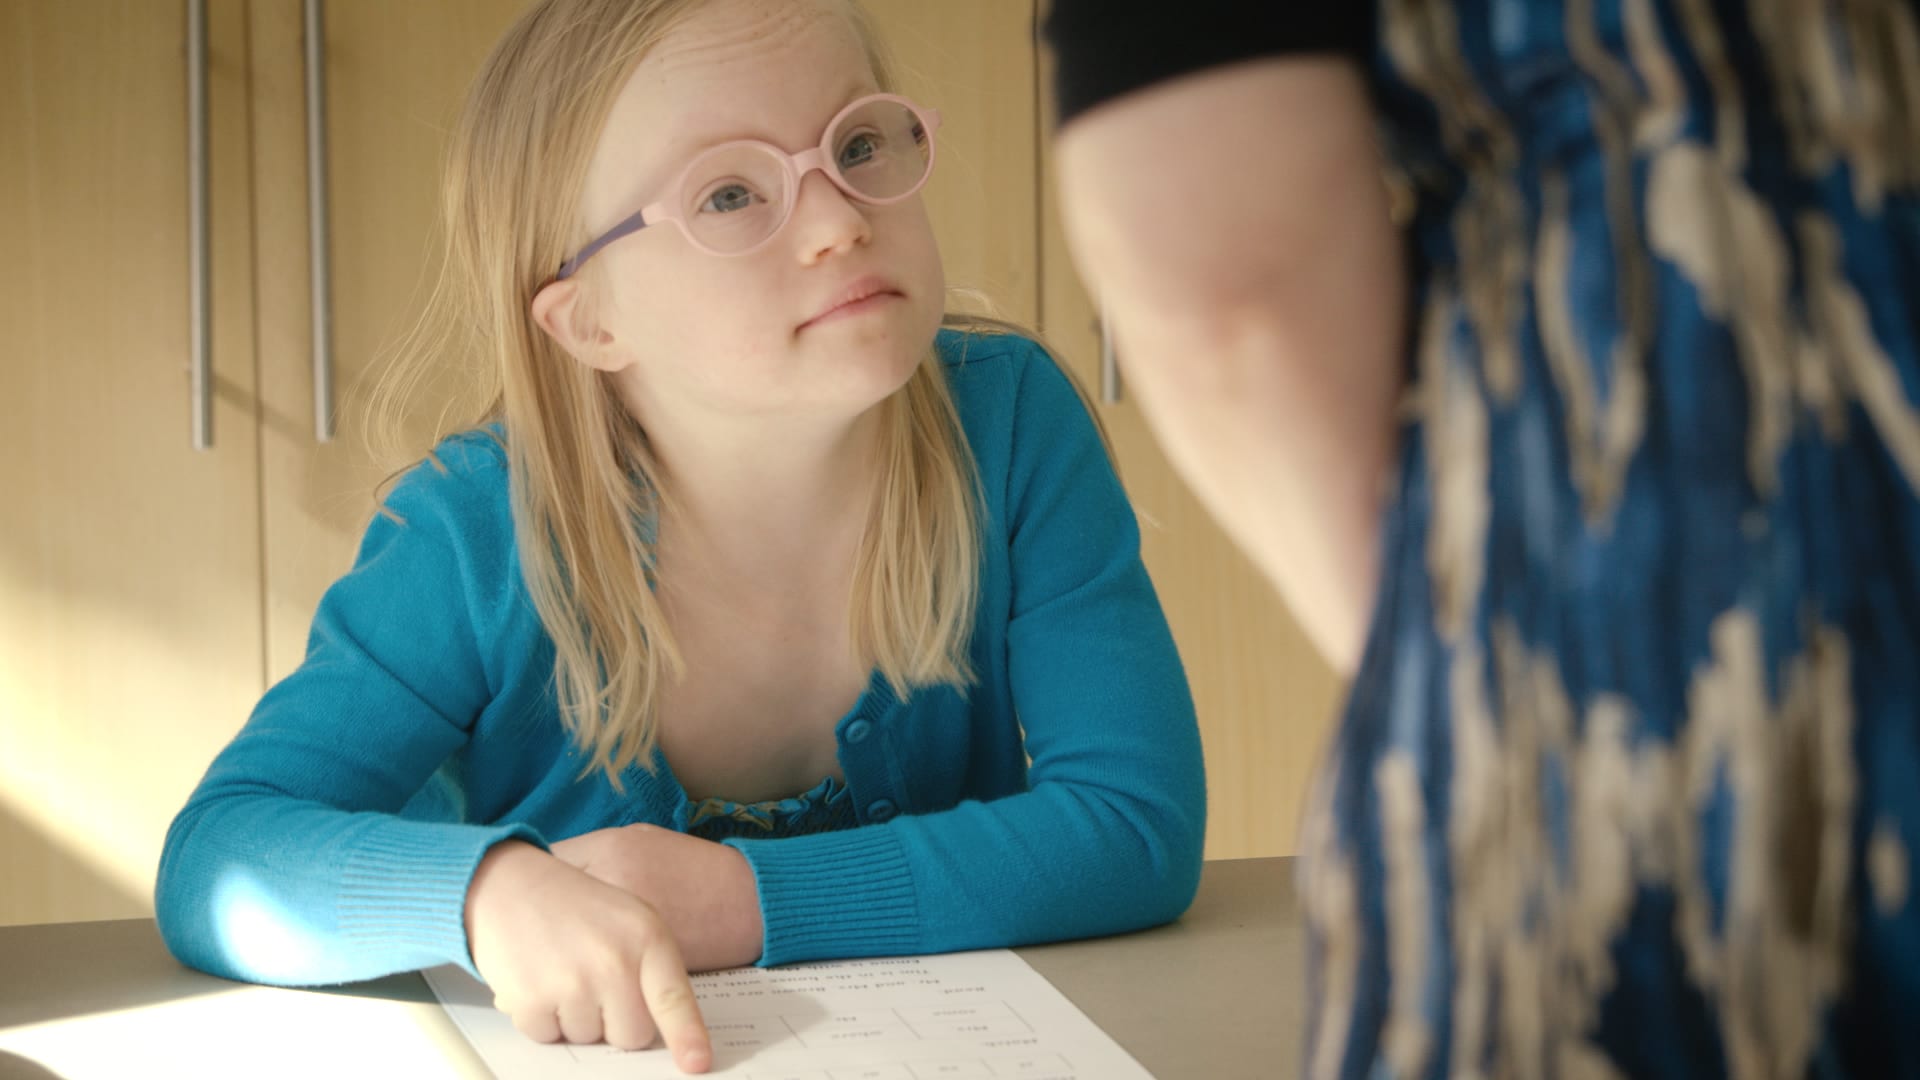 A young girl sits at a desk and a teacher helps her. The little girl has Down's syndrome